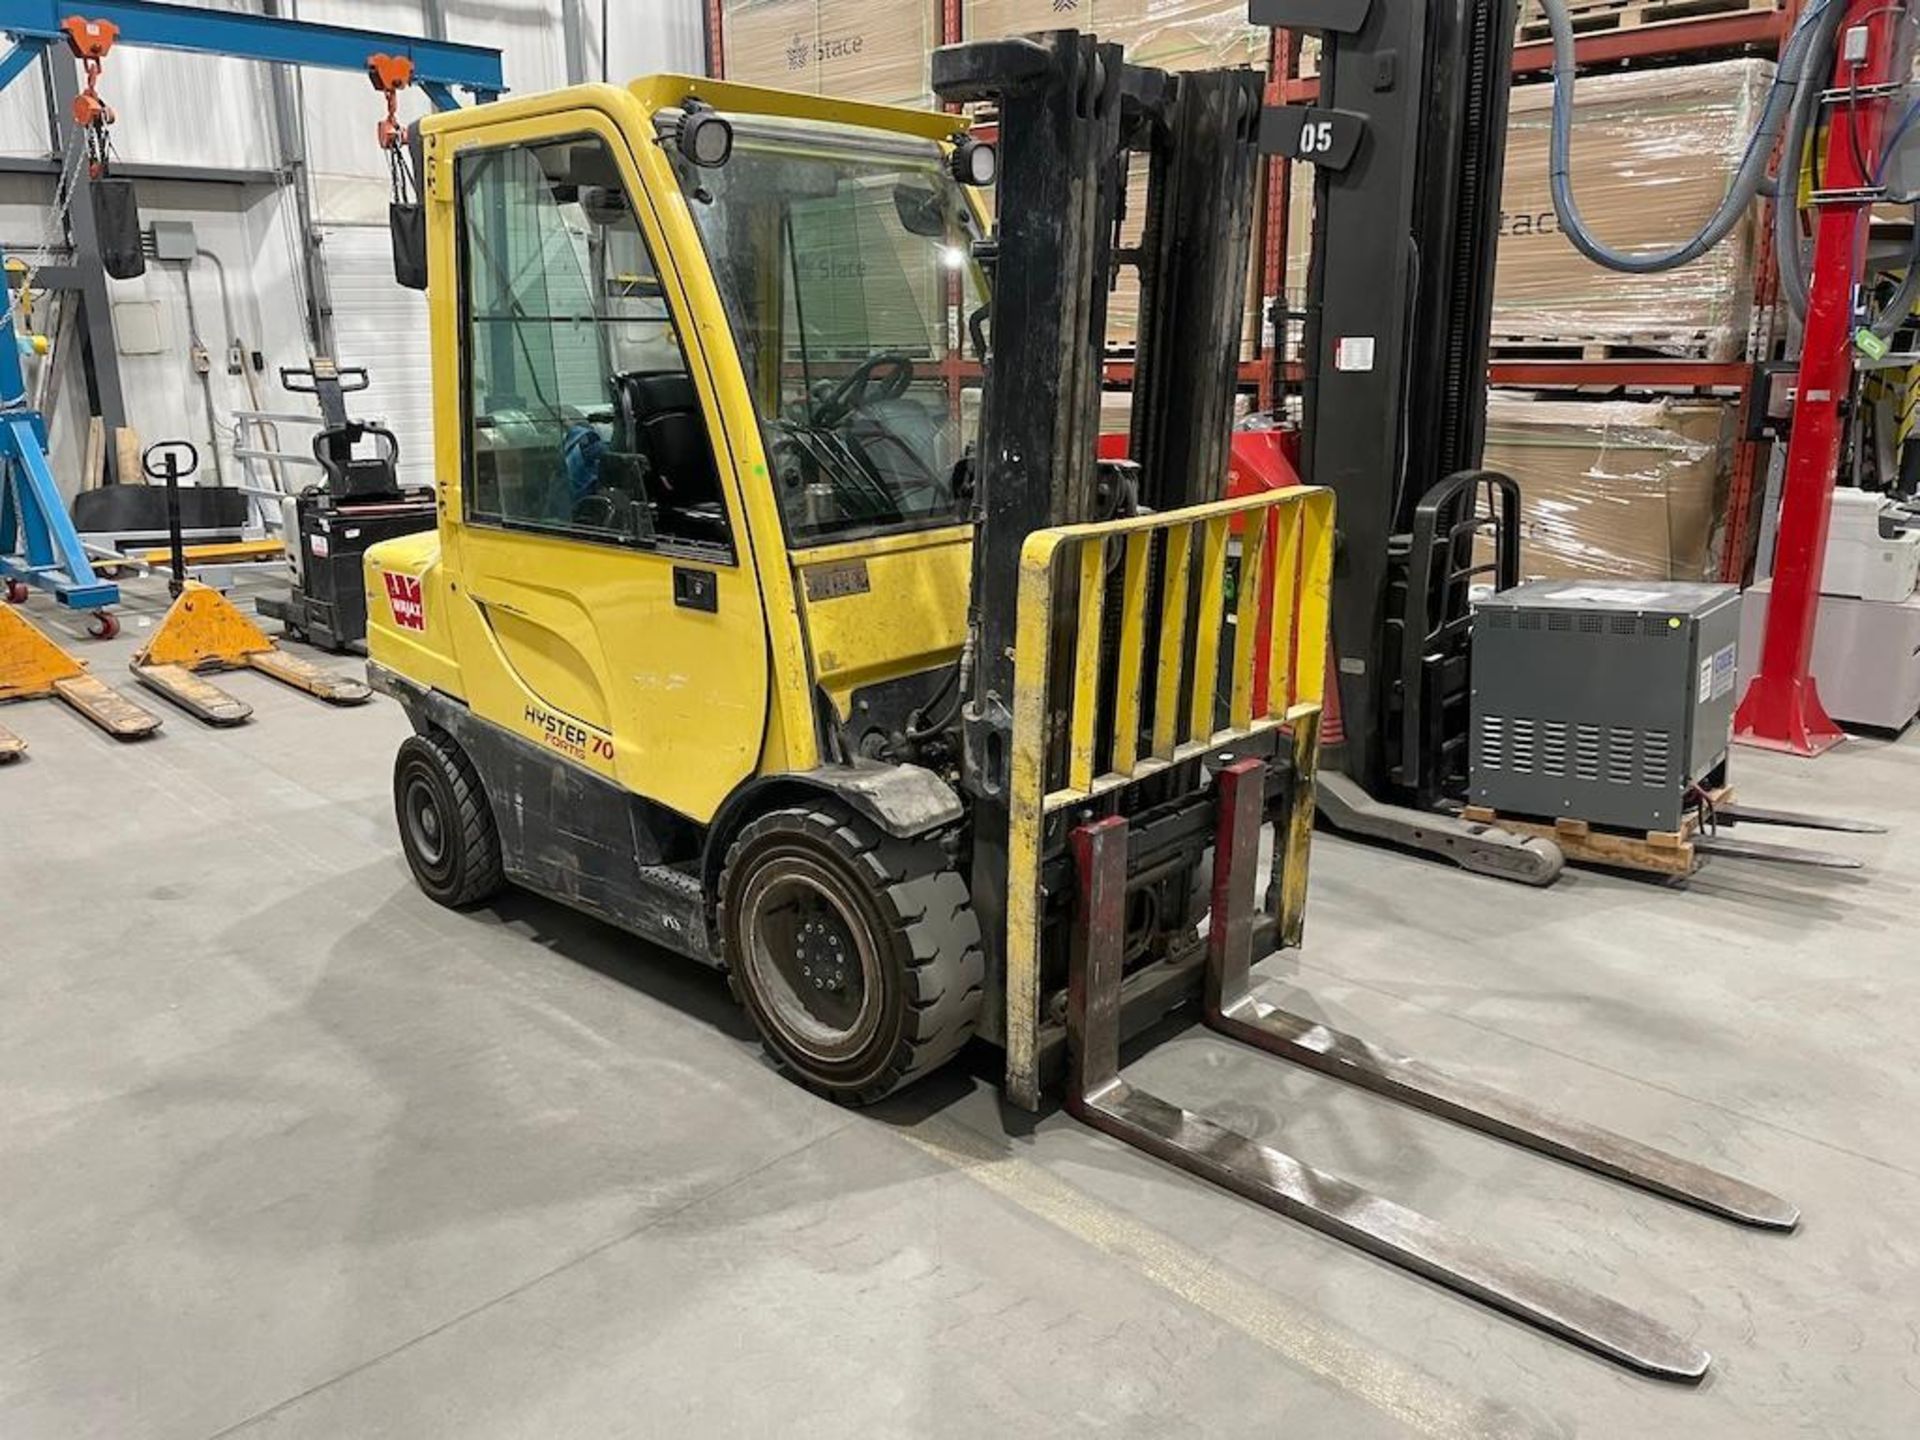 HYSTER FORKLIFT 6,550 LB CAPACITY, MODEL H70, 3 STAGE MAST, SIDE SHIFT, 181 IN LIFT HEIGHT, CAB, 3,3 - Image 2 of 5